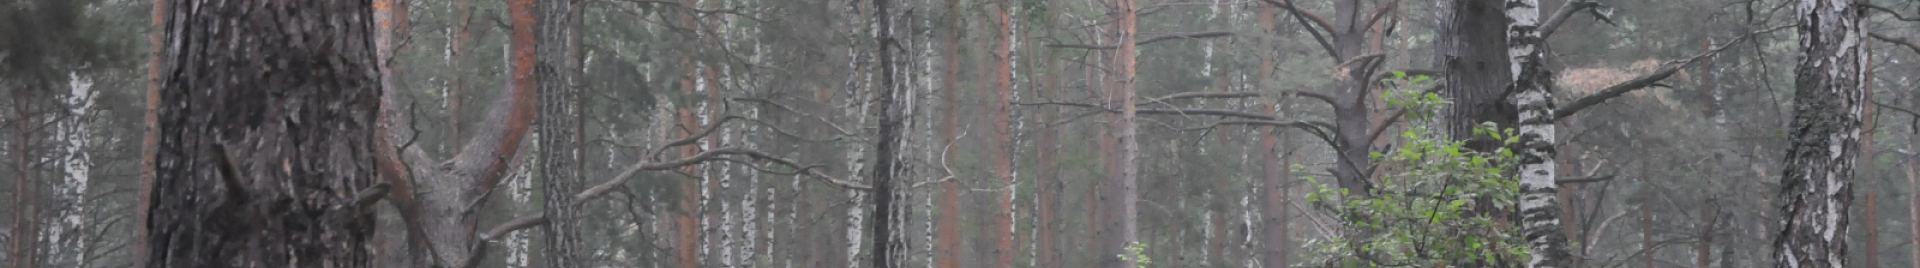 Russian Forest Header Image